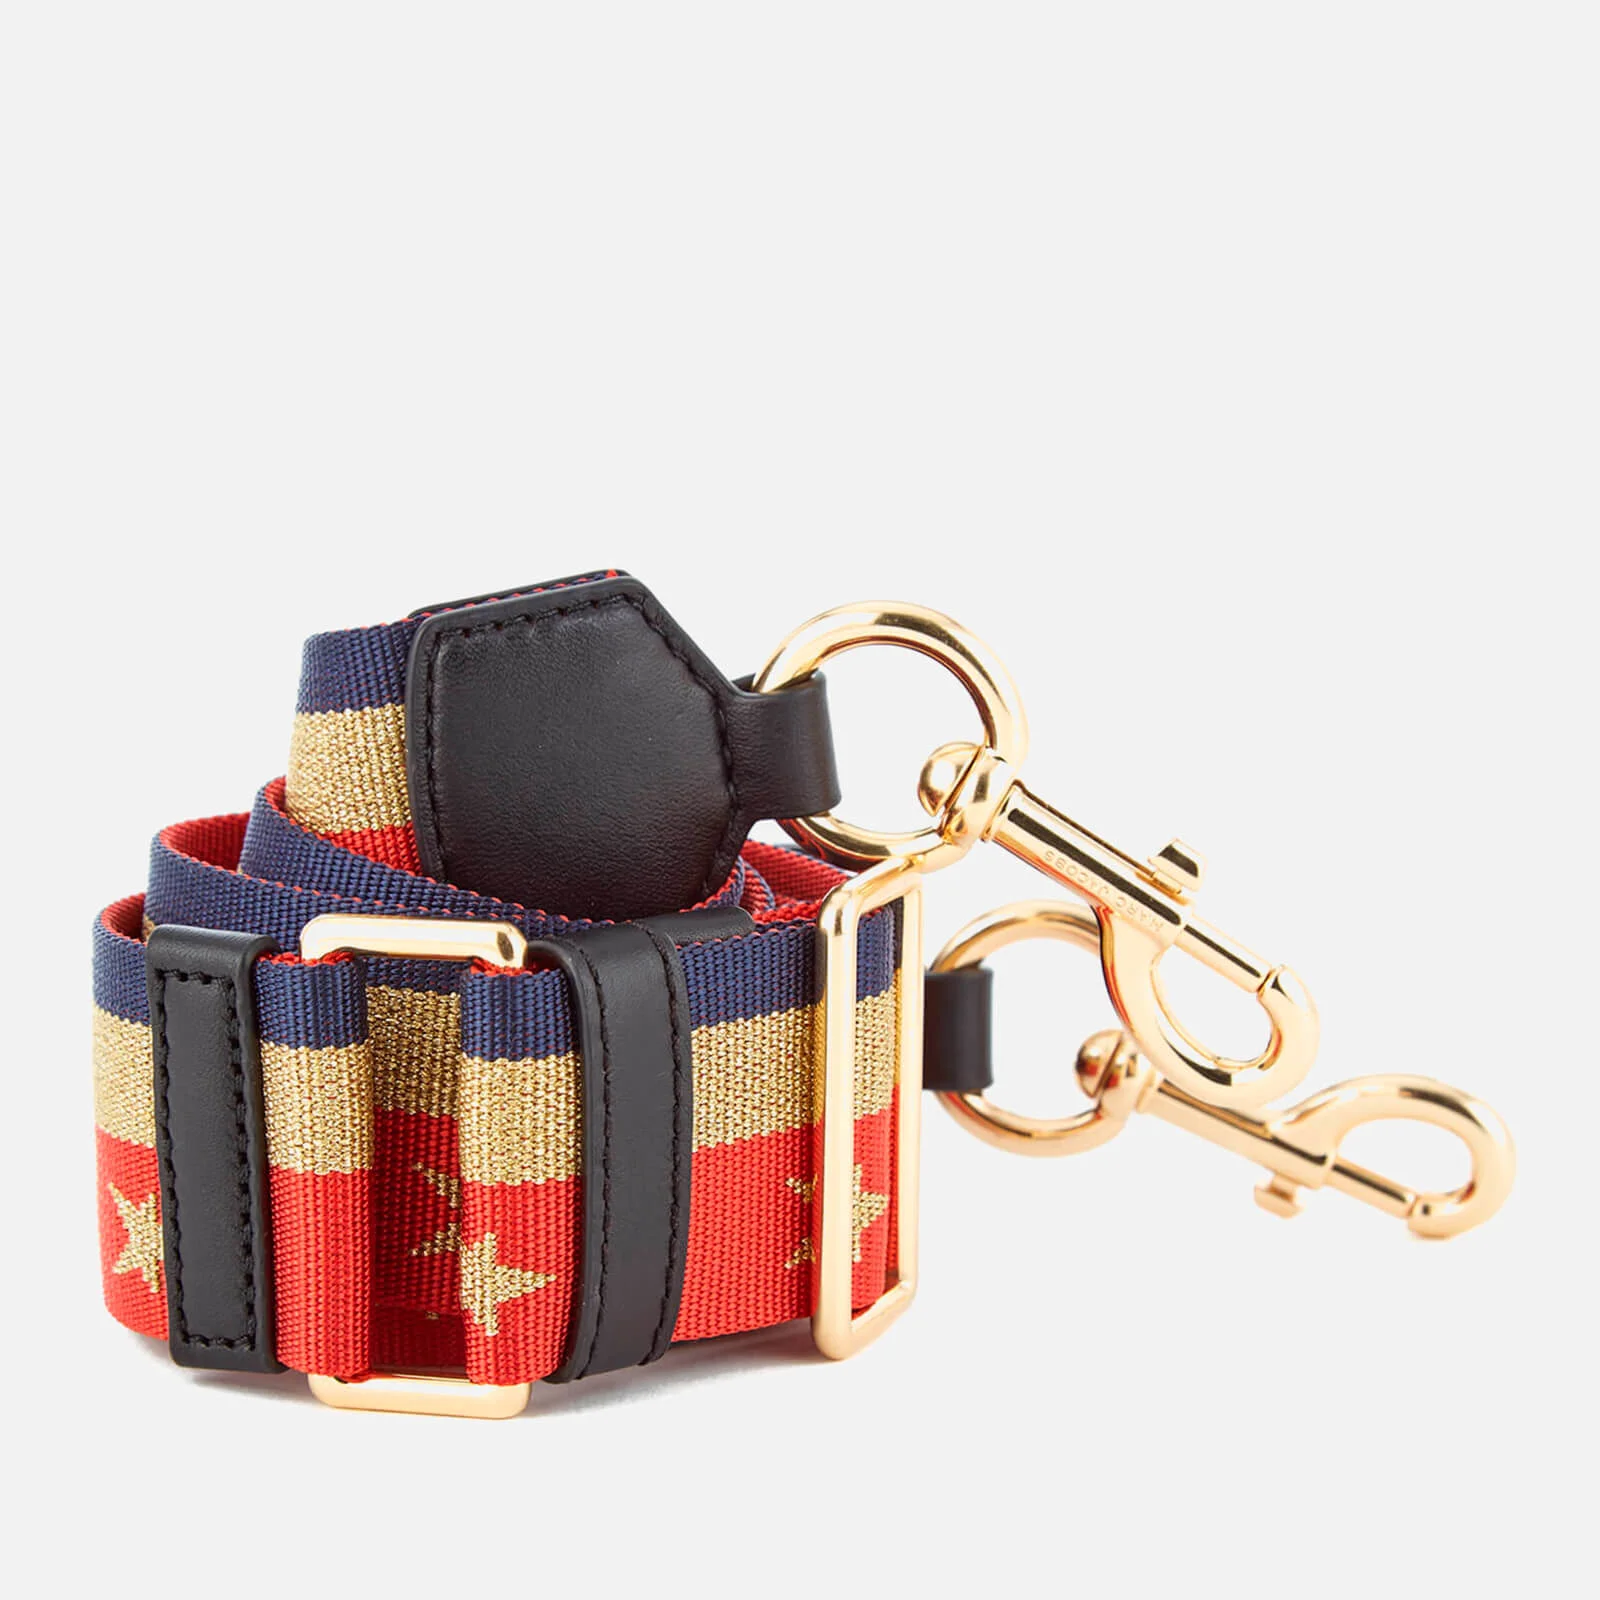 Marc Jacobs Women's Stars and Stripes Bag Strap - Lave Red Multi Image 1